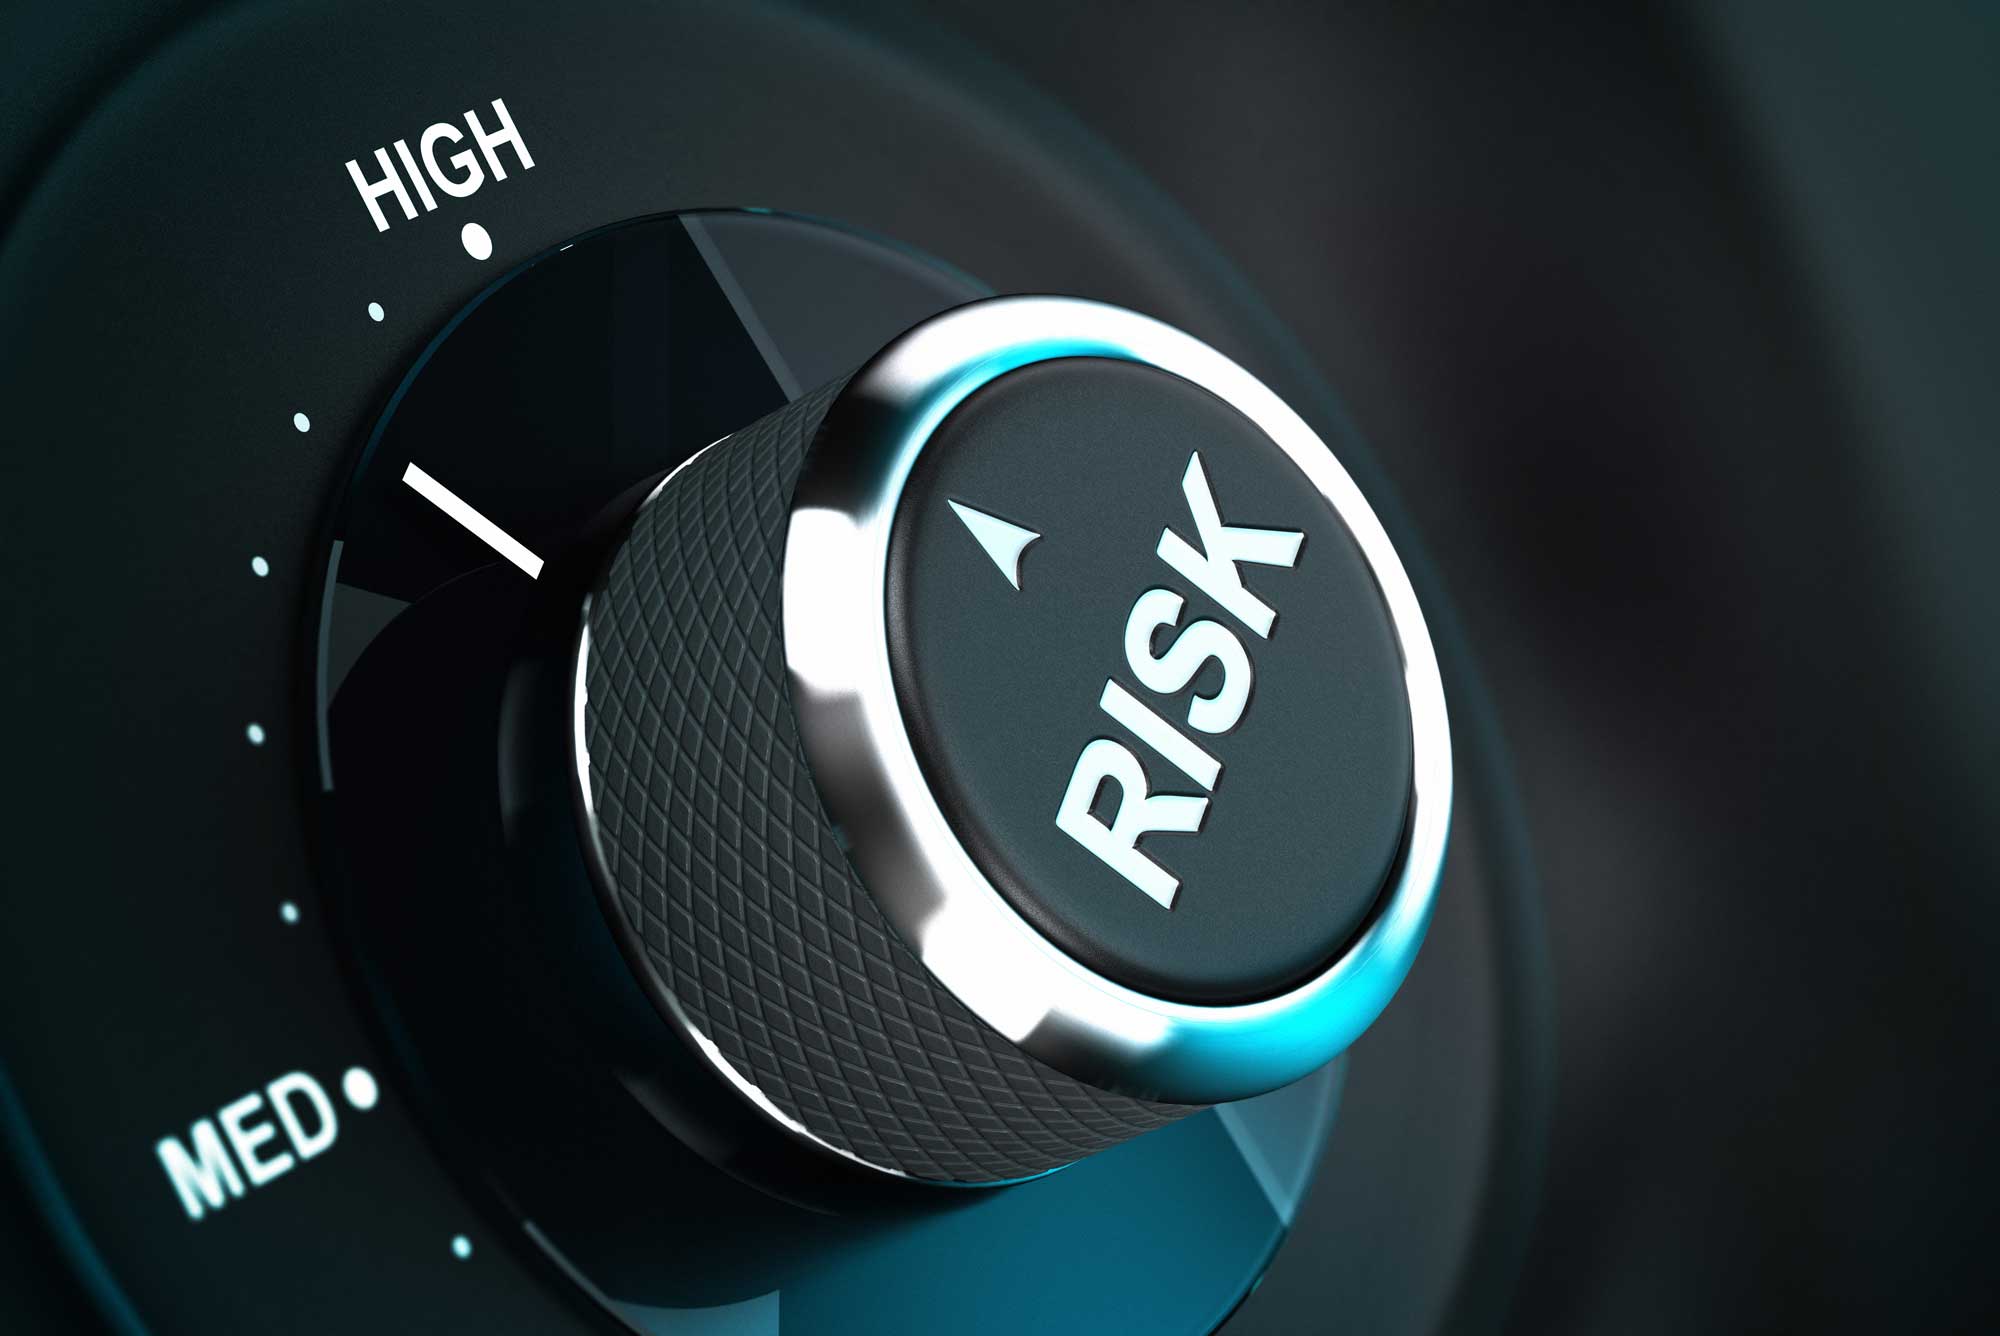 Risk Button | Fire Life Safety Risk Mitigation Consulting Services | Myers Risk Services